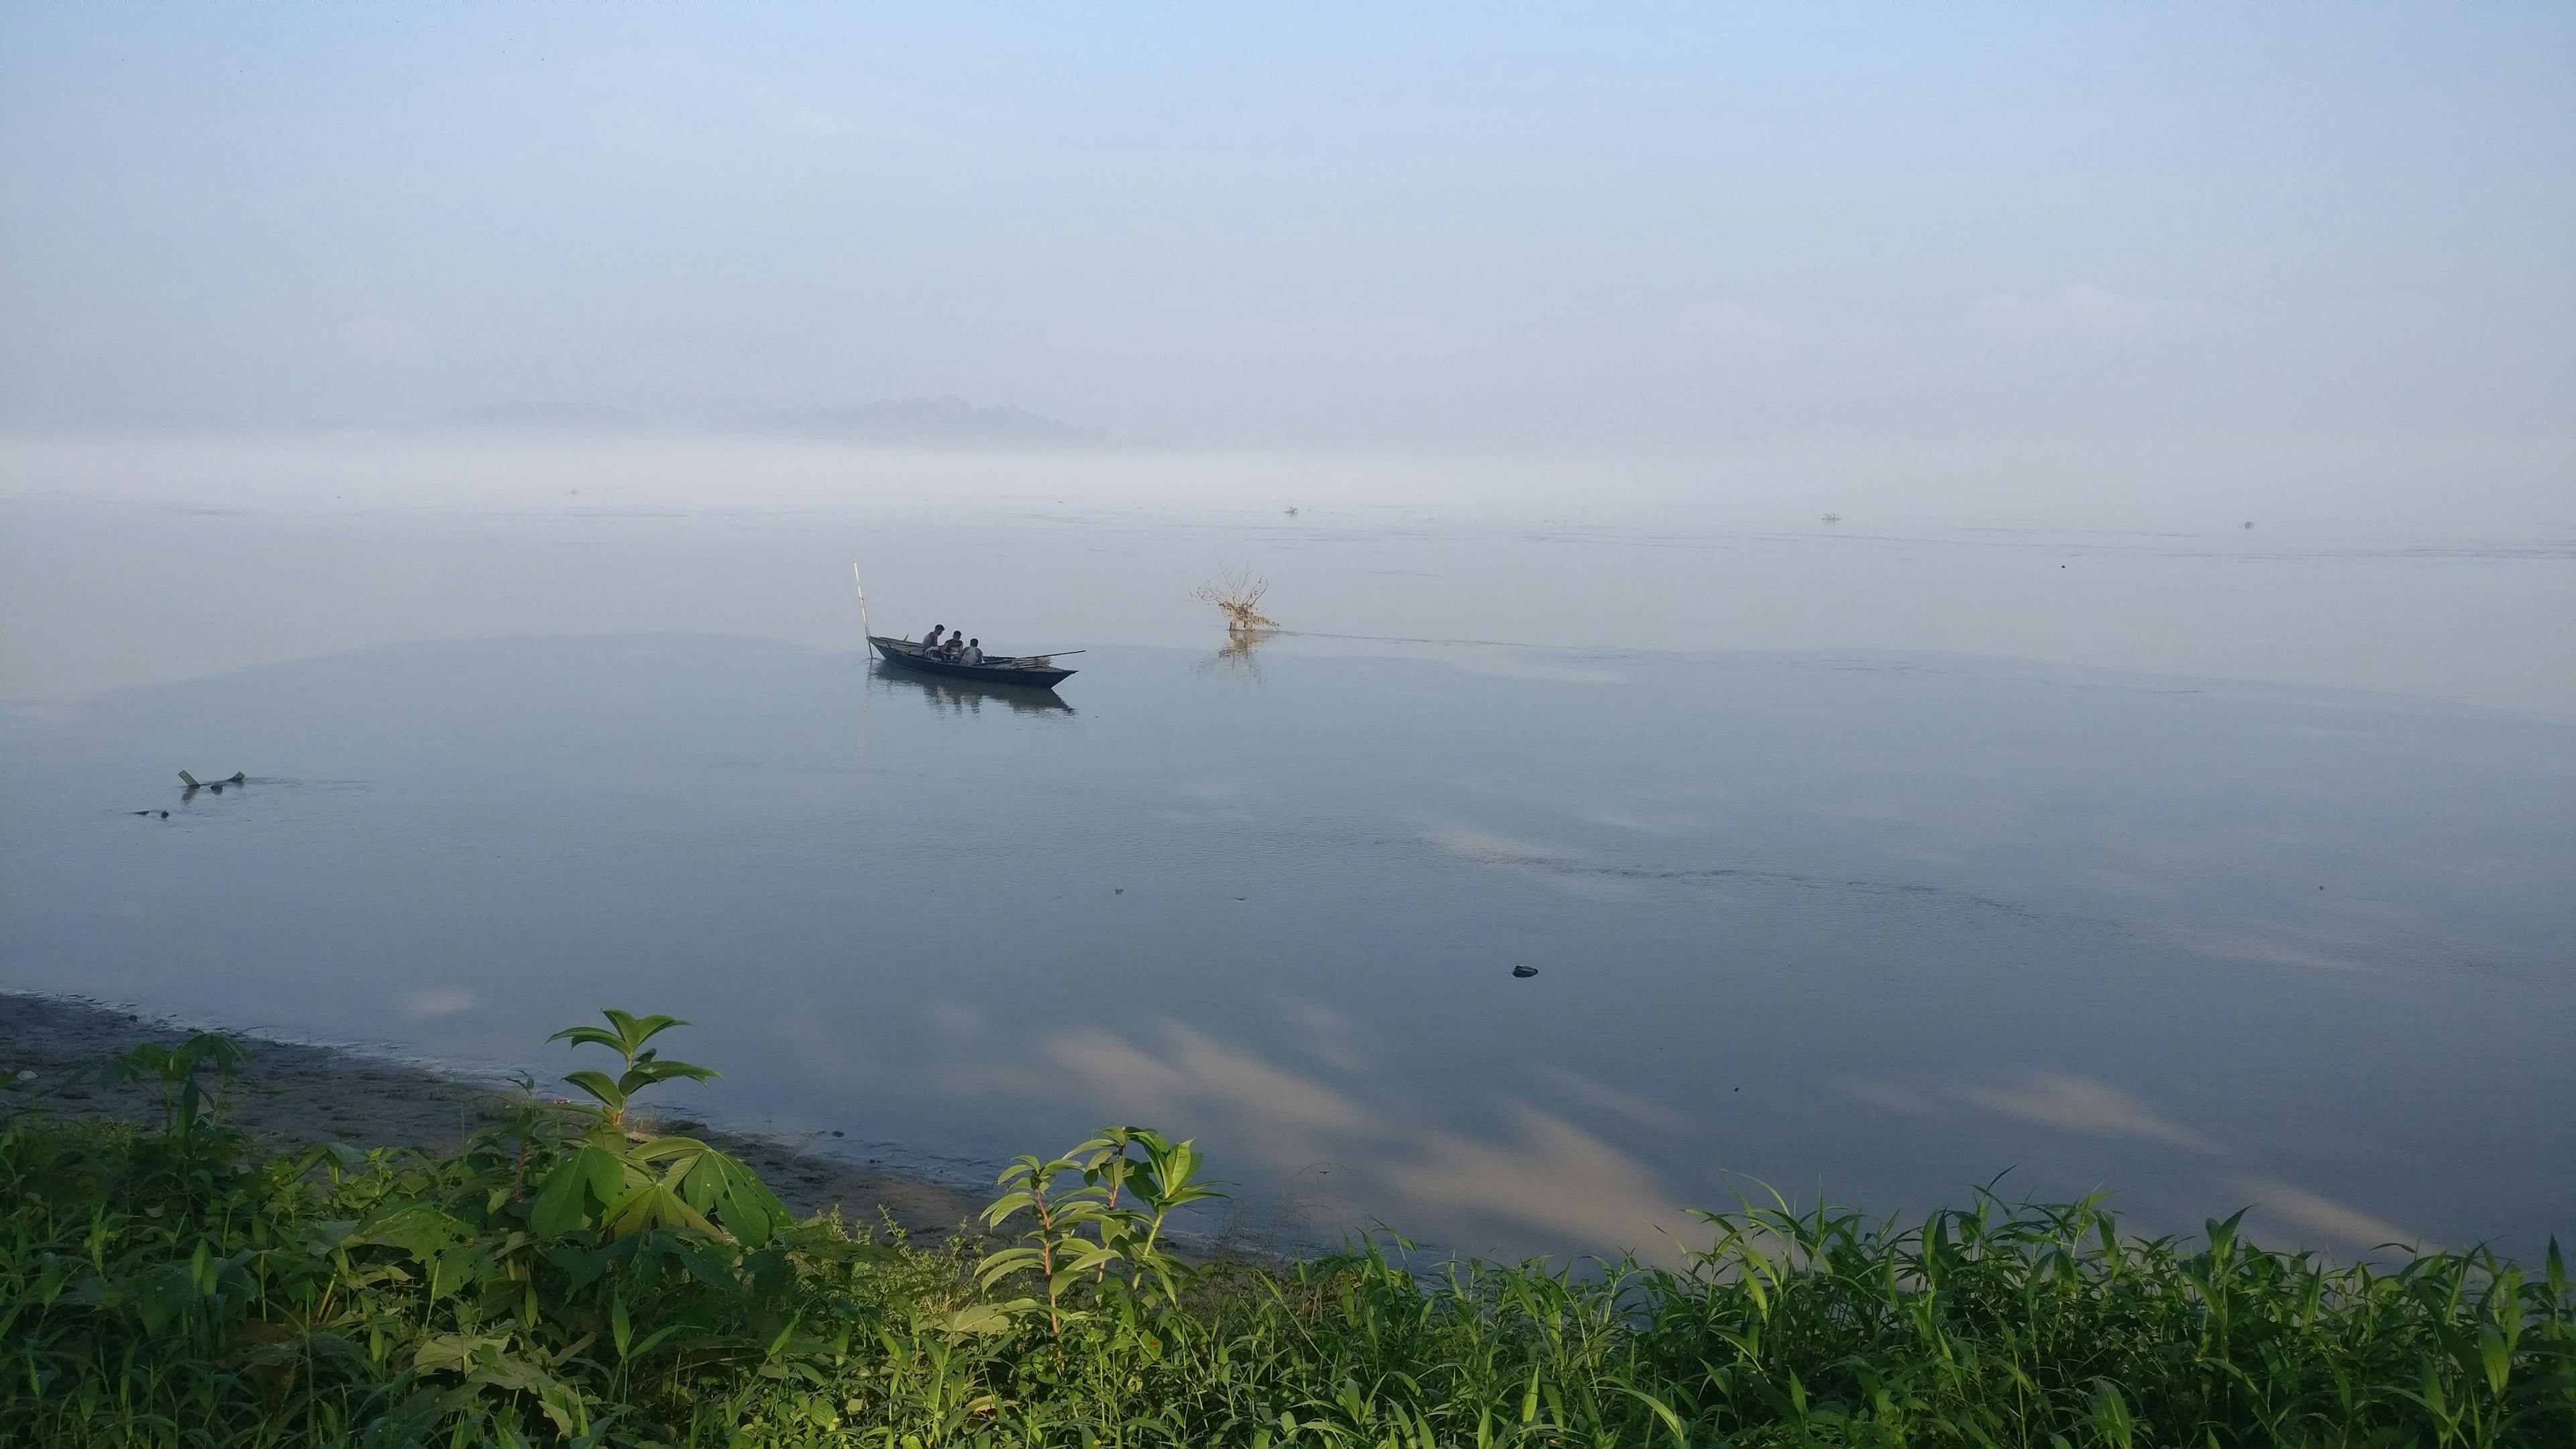 Early morning view of River Brahmaputra in Guwahati